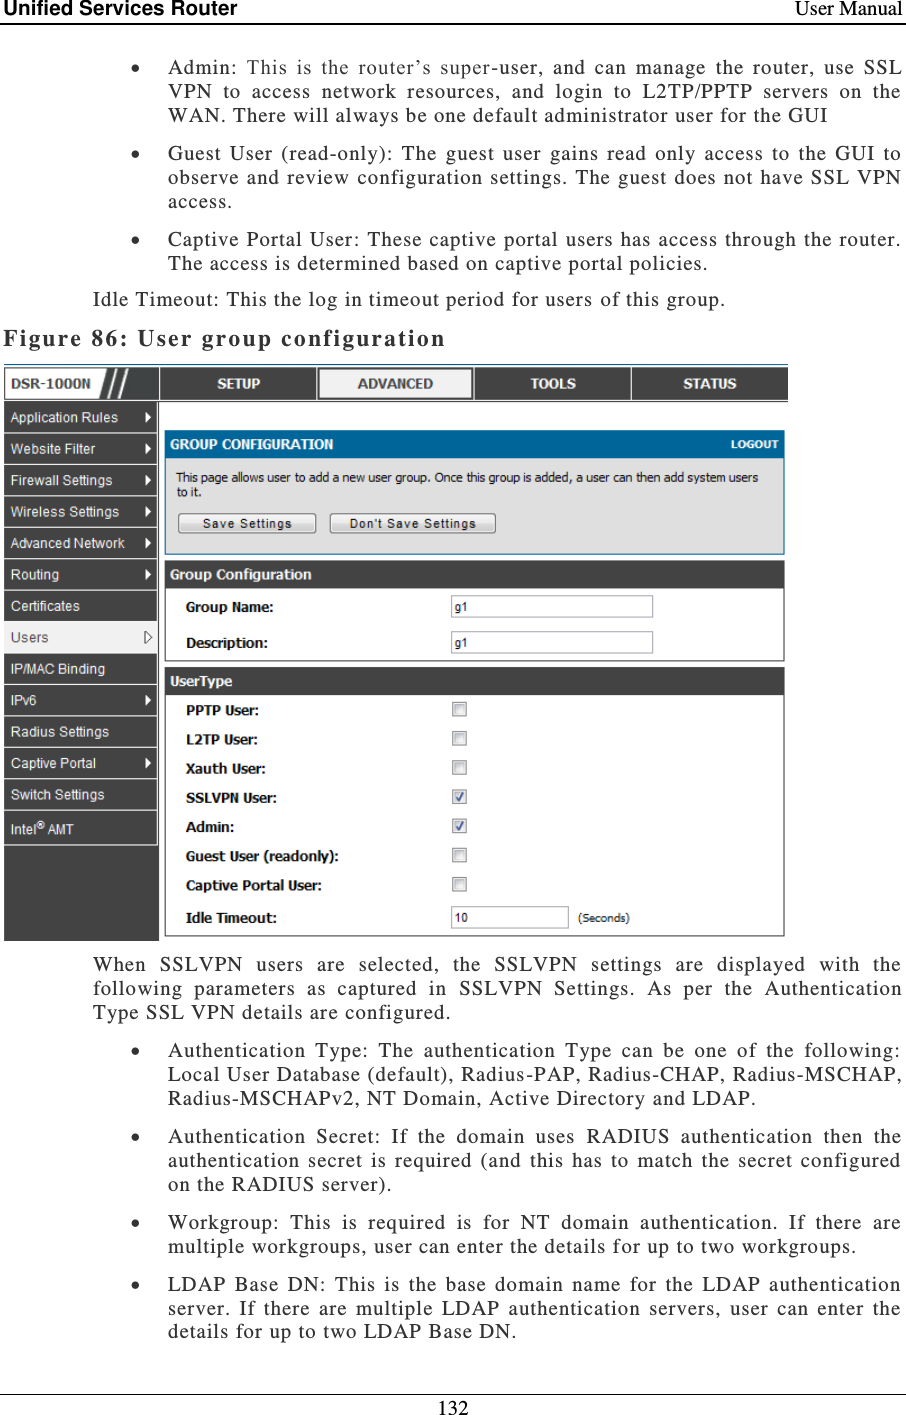 Unified Services Router    User Manual 132   Admin:  This  is  the  router’s  super-user,  and  can  manage  the  router,  use  SSL VPN  to  access  network  resources,  and  login  to  L2TP/PPTP  servers  on  the WAN. There will always be one default administrator user for the GUI   Guest  User  (read-only):  The  guest  user  gains  read  only  access  to  the  GUI  to observe and review  configuration settings. The guest does not have SSL VPN access.  Captive Portal User: These captive portal users has access through the router. The access is determined based on captive portal policies.  Idle Timeout: This the log in timeout period for users of this group. Figure 86: User group configuration   When  SSLVPN  users  are  selected,  the  SSLVPN  settings  are  displayed  with  the following  parameters  as  captured  in  SSLVPN  Settings.  As  per  the  Authentication Type SSL VPN details are configured.  Authentication  Type:  The  authentication  Type  can  be  one  of  the  following: Local User Database (default), Radius -PAP, Radius-CHAP, Radius-MSCHAP, Radius-MSCHAPv2, NT Domain, Active Directory and LDAP.  Authentication  Secret:  If  the  domain  uses  RADIUS  authentication  then  the authentication  secret  is  required  (and  this  has  to  match  the  secret  configured on the RADIUS server).  Workgroup:  This  is  required  is  for  NT  domain  authentication.  If  there  are multiple workgroups, user can enter the details for up to two workgroups.  LDAP  Base  DN:  This  is  the  base  domain  name  for  the  LDAP  authentication server.  If  there  are  multiple  LDAP  authentication  servers,  user  can  enter  the details for up to two LDAP Base DN. 